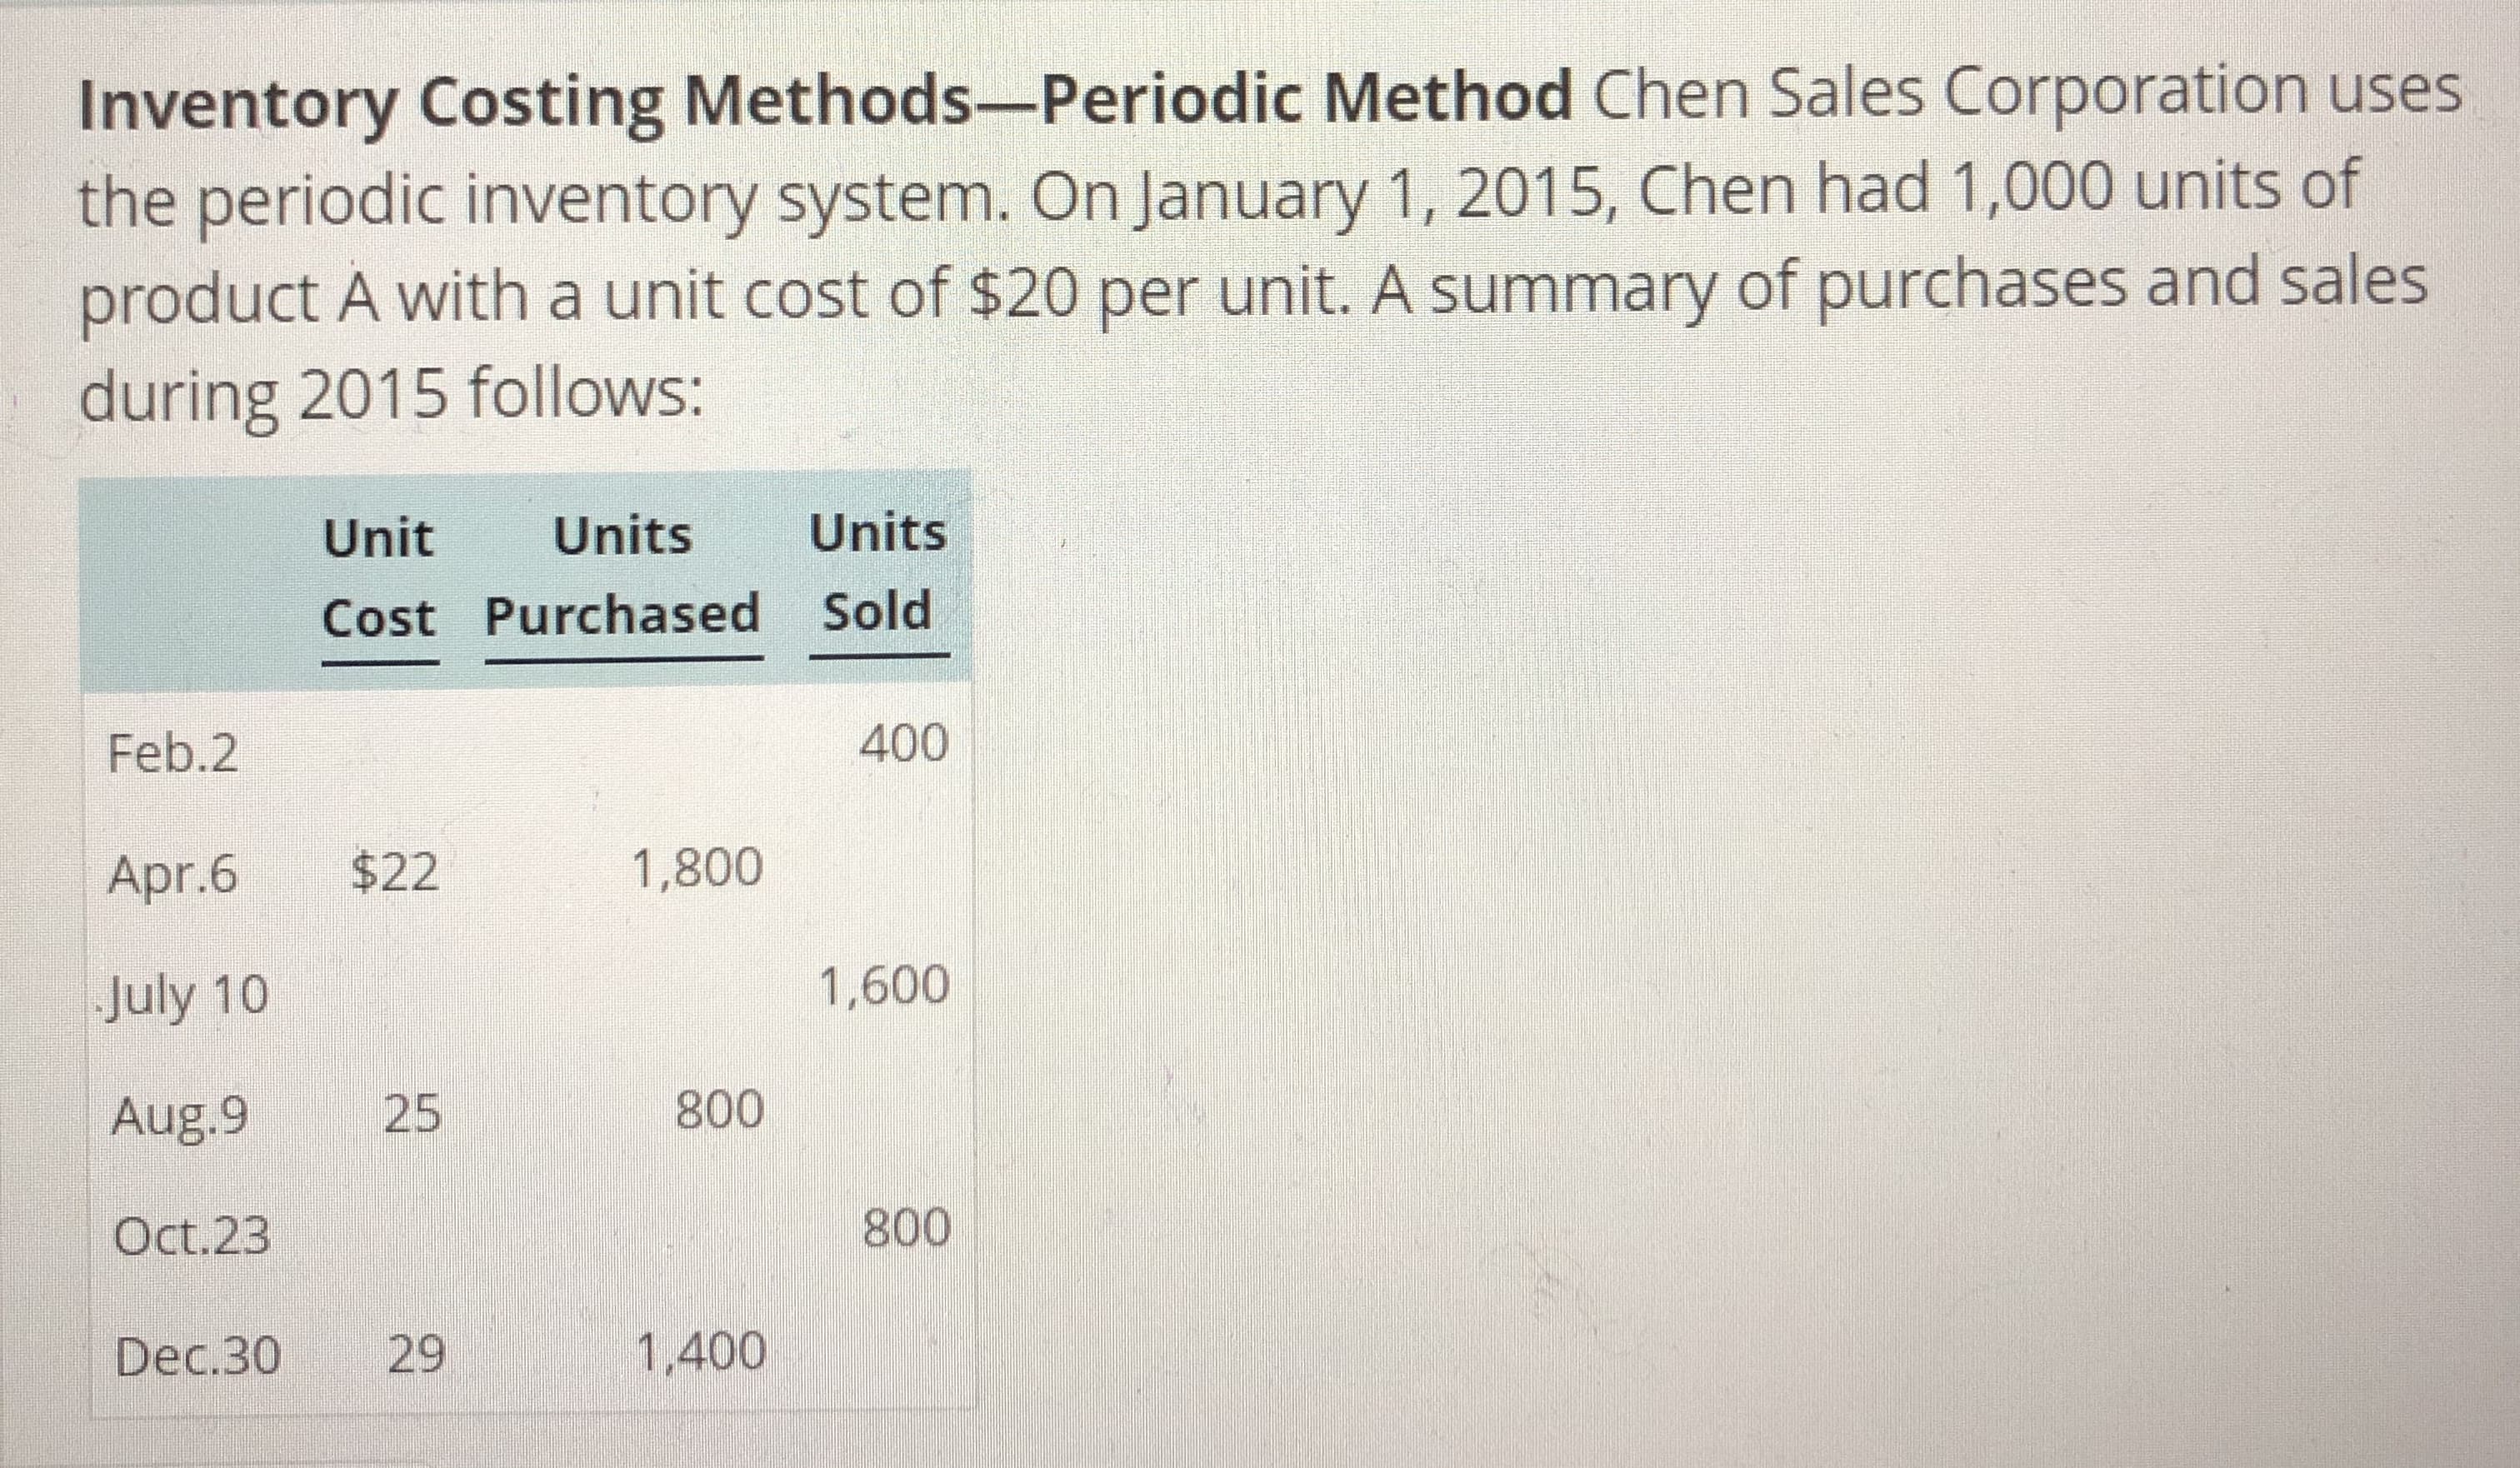 Inventory Costing Methods-Periodic Method Chen Sales Corporation uses
the periodic inventory system. On January 1, 2015, Chen had 1,000 units of
product A with a unit cost of $20 per unit. A summary of purchases and sales
during 2015 follows:
Unit Units Units
Cost Purchased Sold
Feb.2
Apr.6 $22
July 10
Aug 9 25
Oct.23
Dec.30 29
400
1,800
1,600
800
800
1,400
